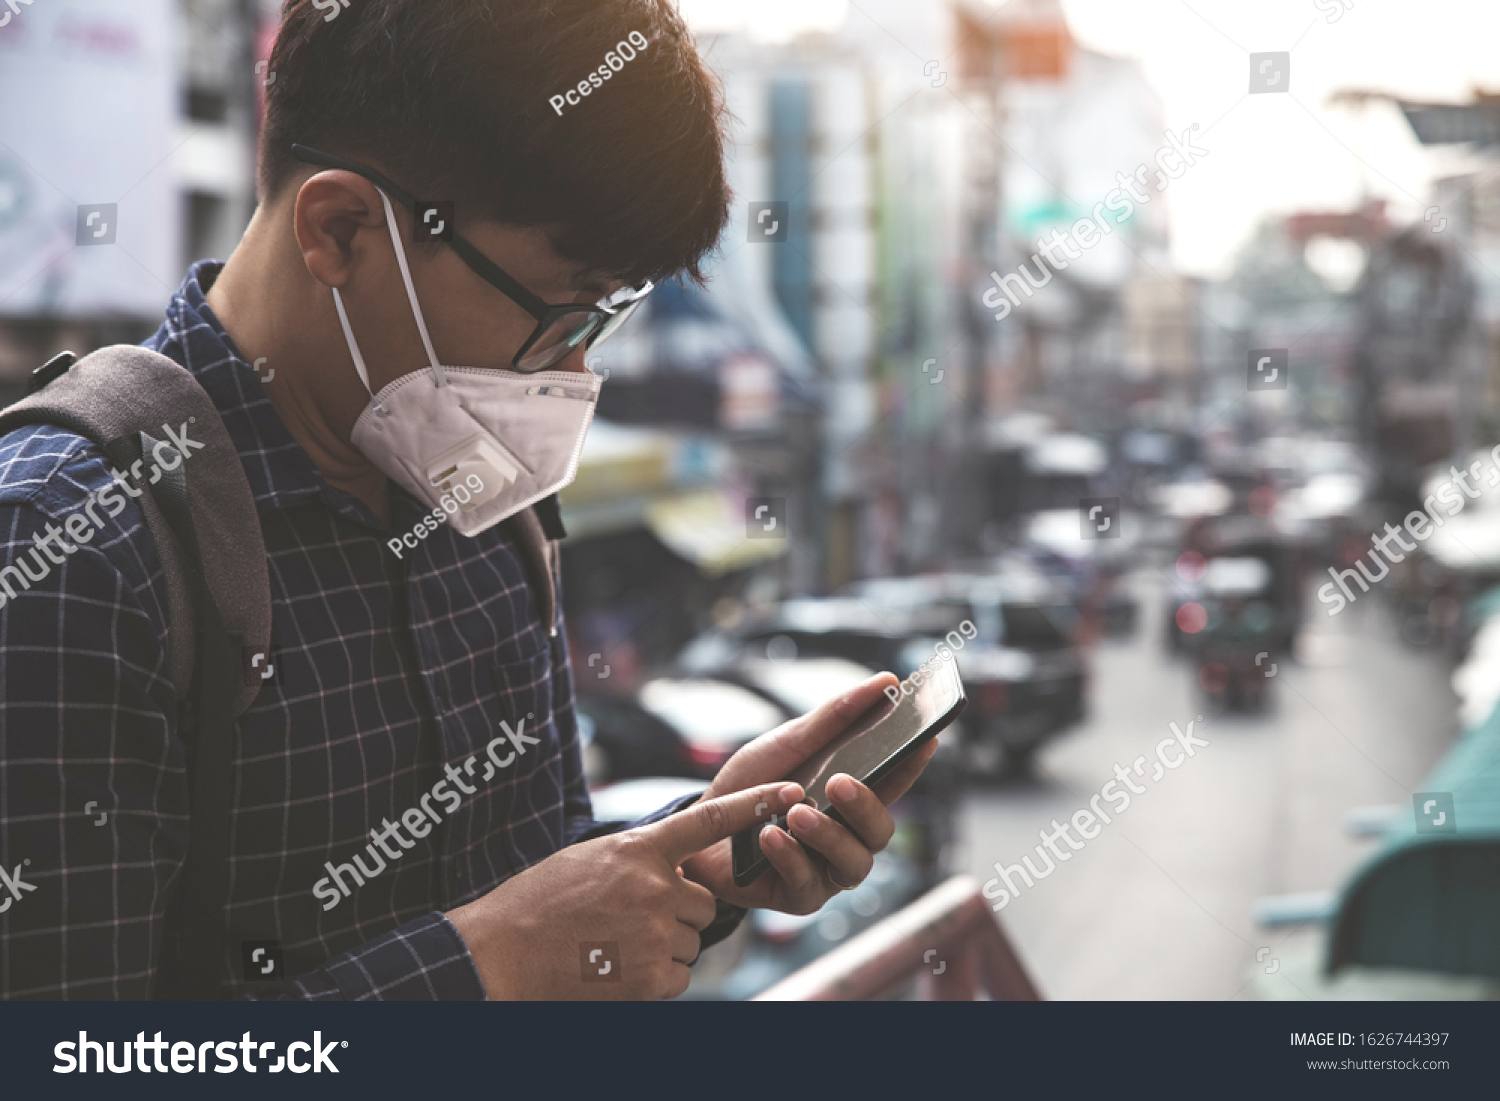 Concept of coronavirus quarantine. MERS-Cov, Novel coronavirus (2019-nCoV), man with medical face mask using the phone to search for news.Air pollution  #1626744397